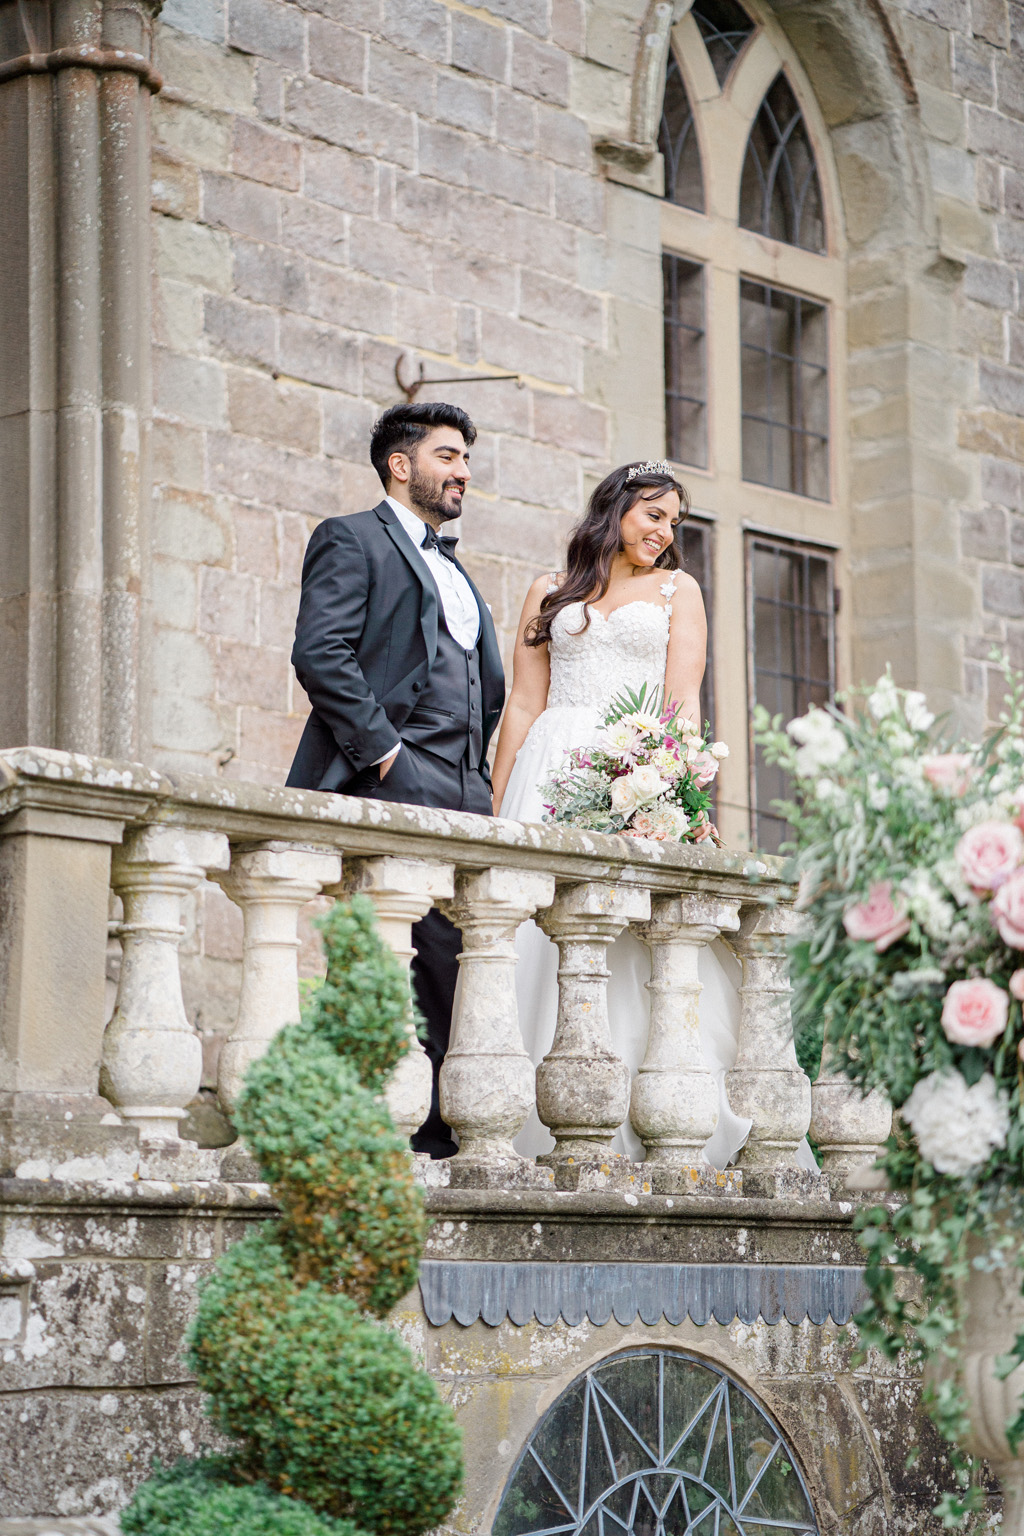 classic wedding inspiration by clearwell castle wedding photographer Sara Cooper Photography on the English Wedding Blog